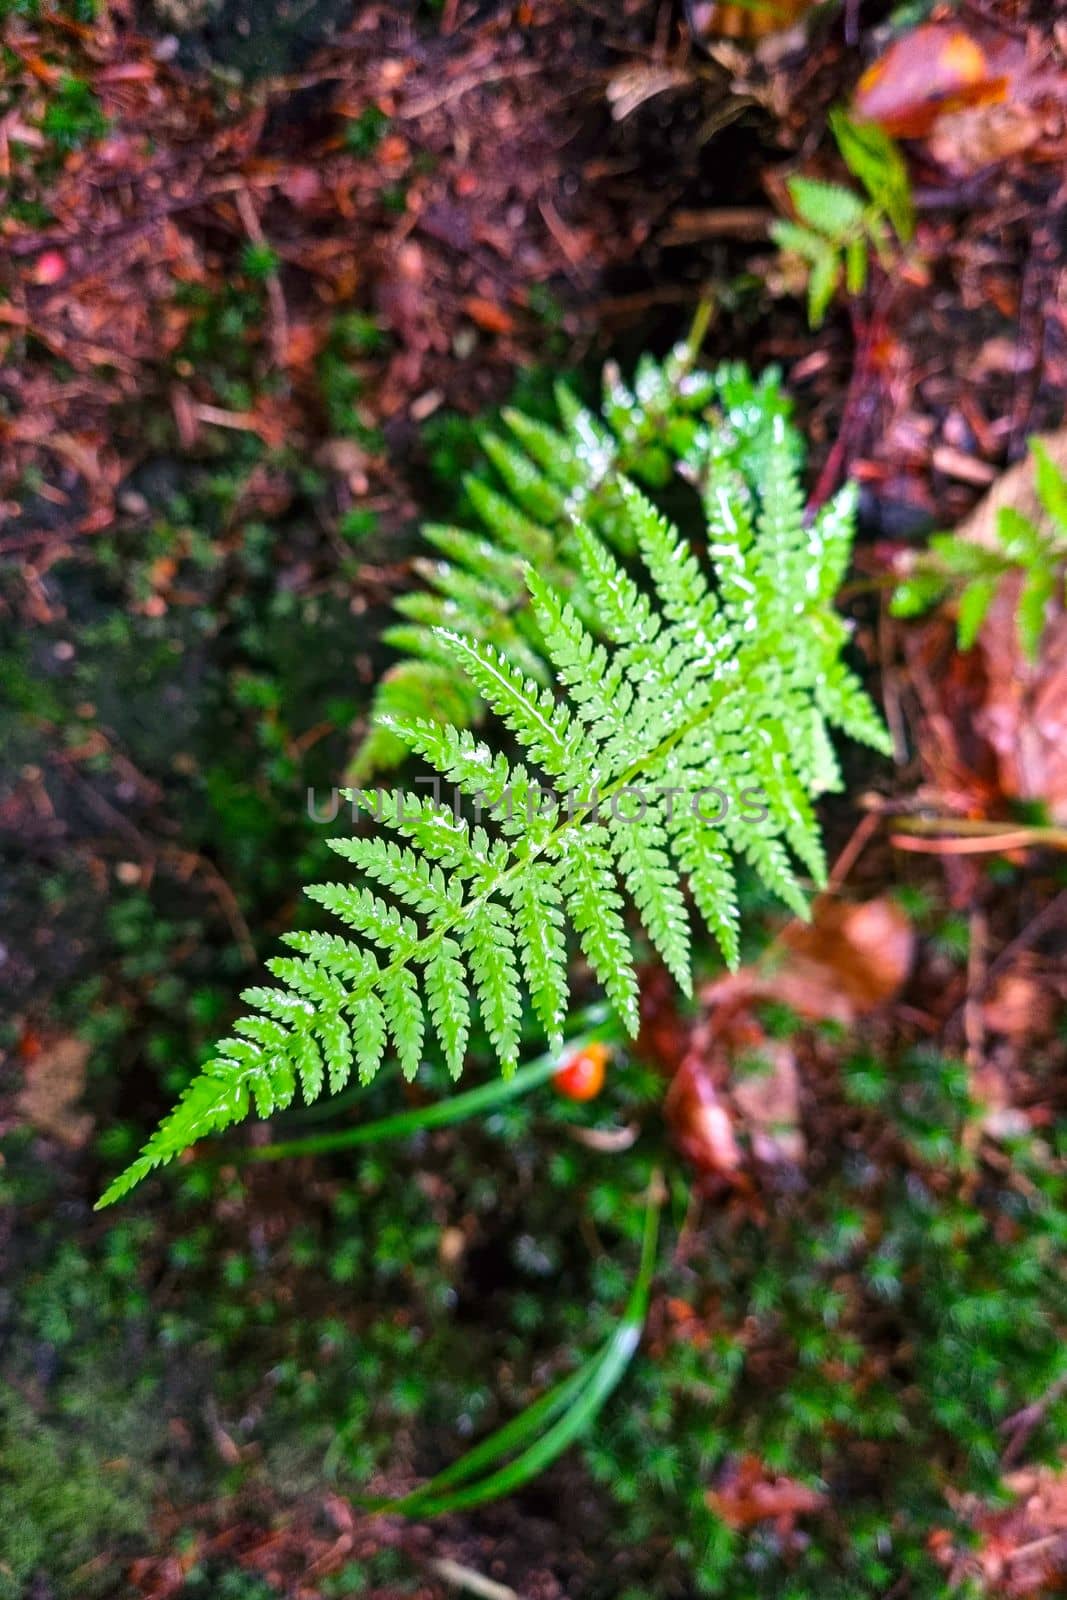 Close-up on a blooming green fern in the forest. Sample of natural ferns. Natural fern